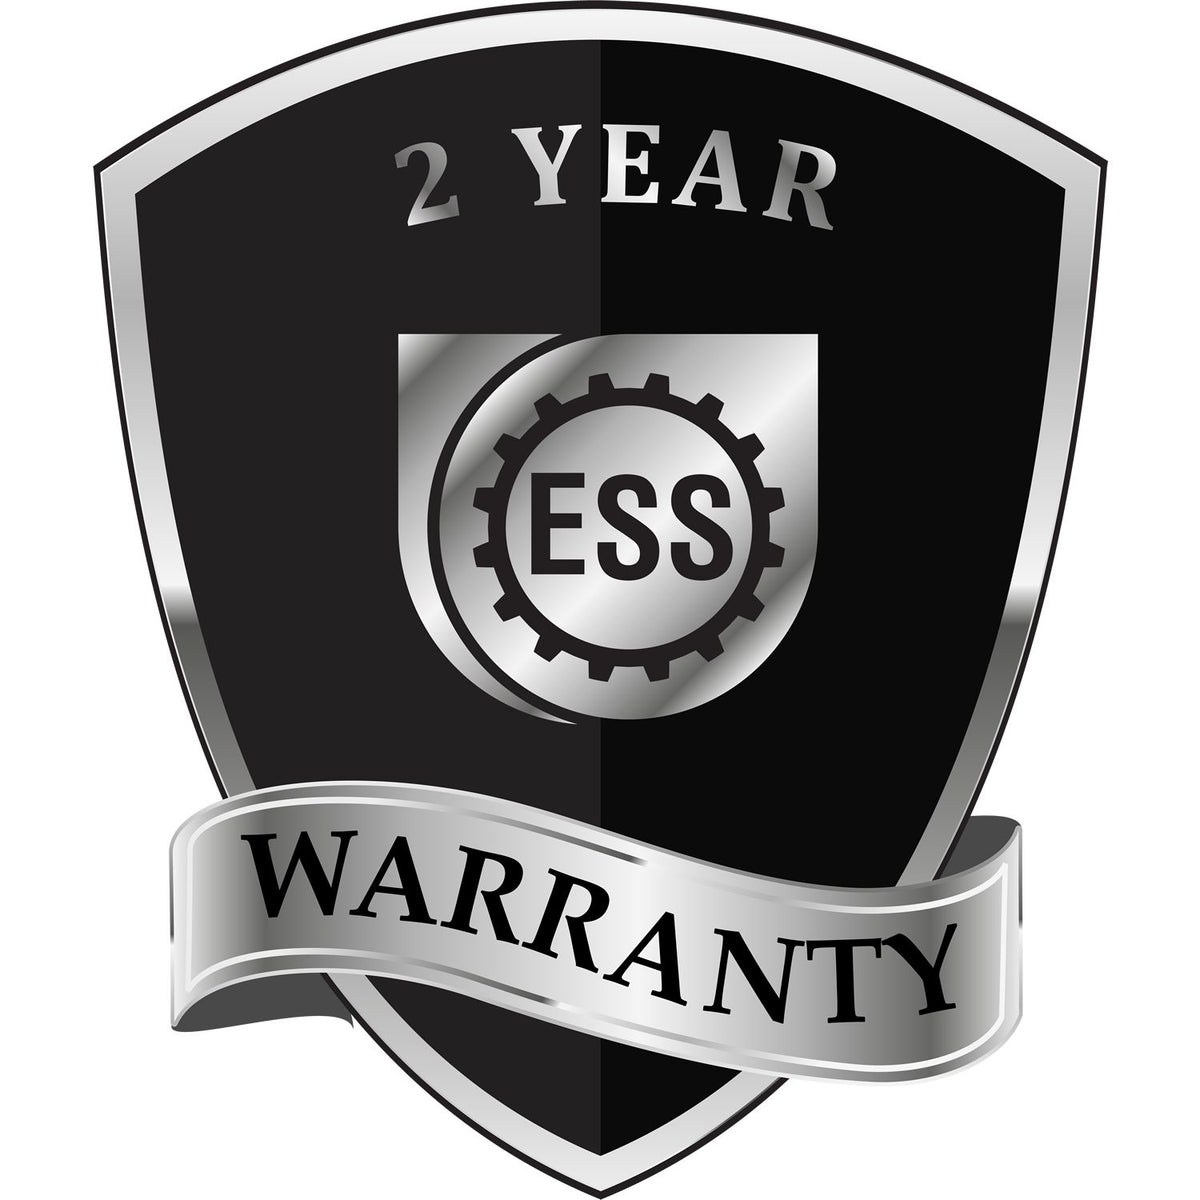 A badge or emblem showing a warranty icon for the Handheld Indiana Land Surveyor Seal